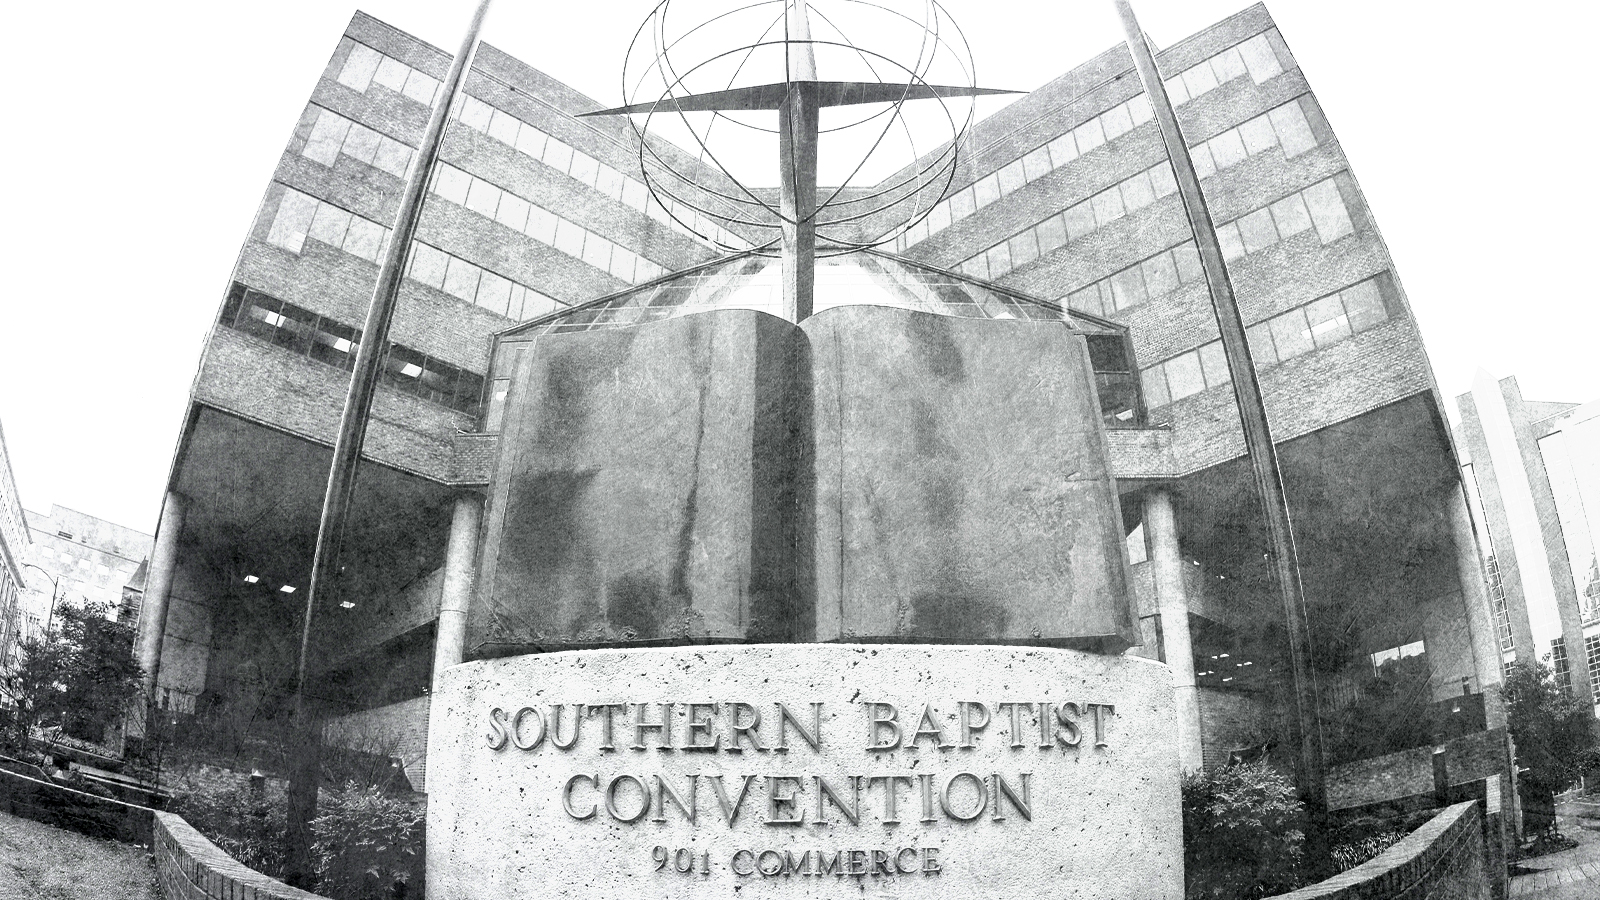 The Southern Baptist Convention.